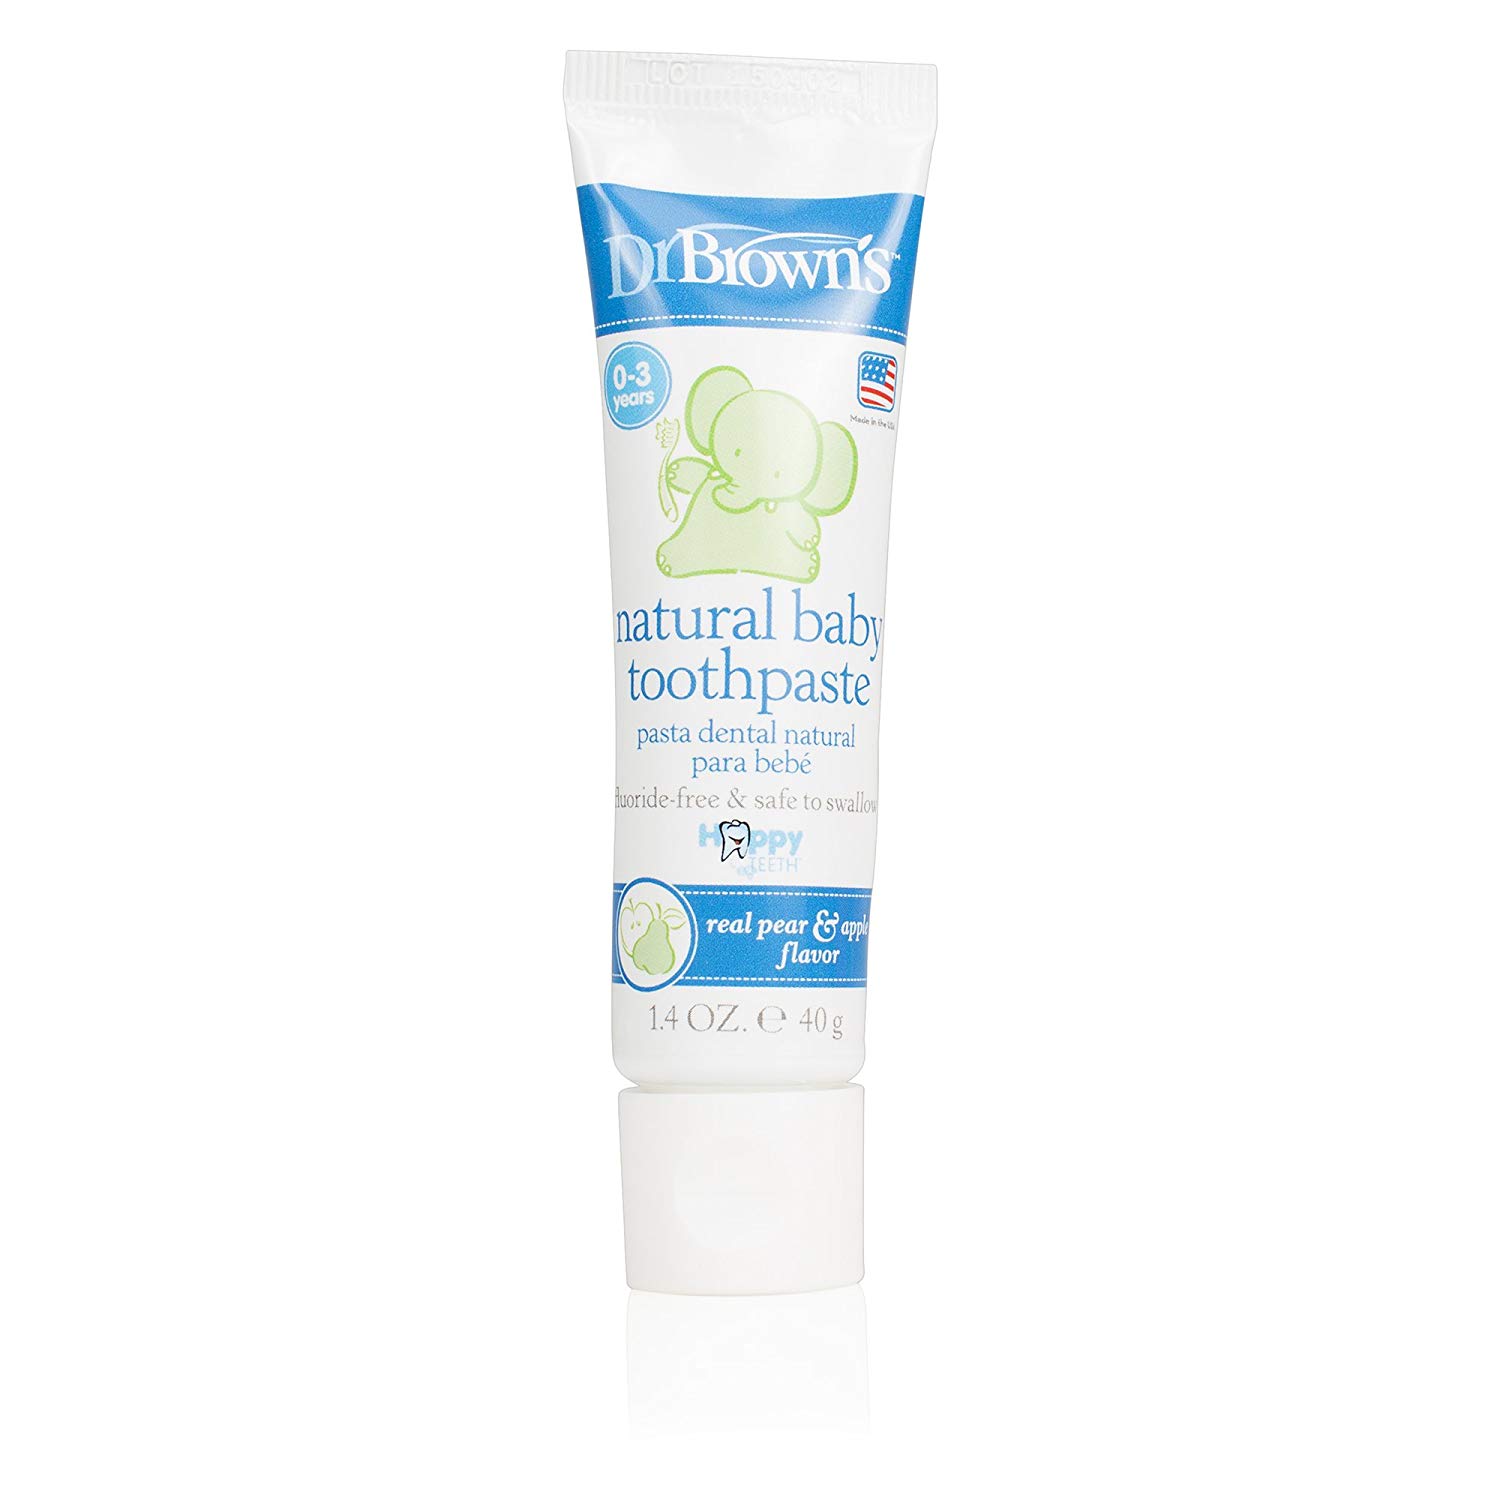 Natural Baby Toothpaste, 1.4 Ounce